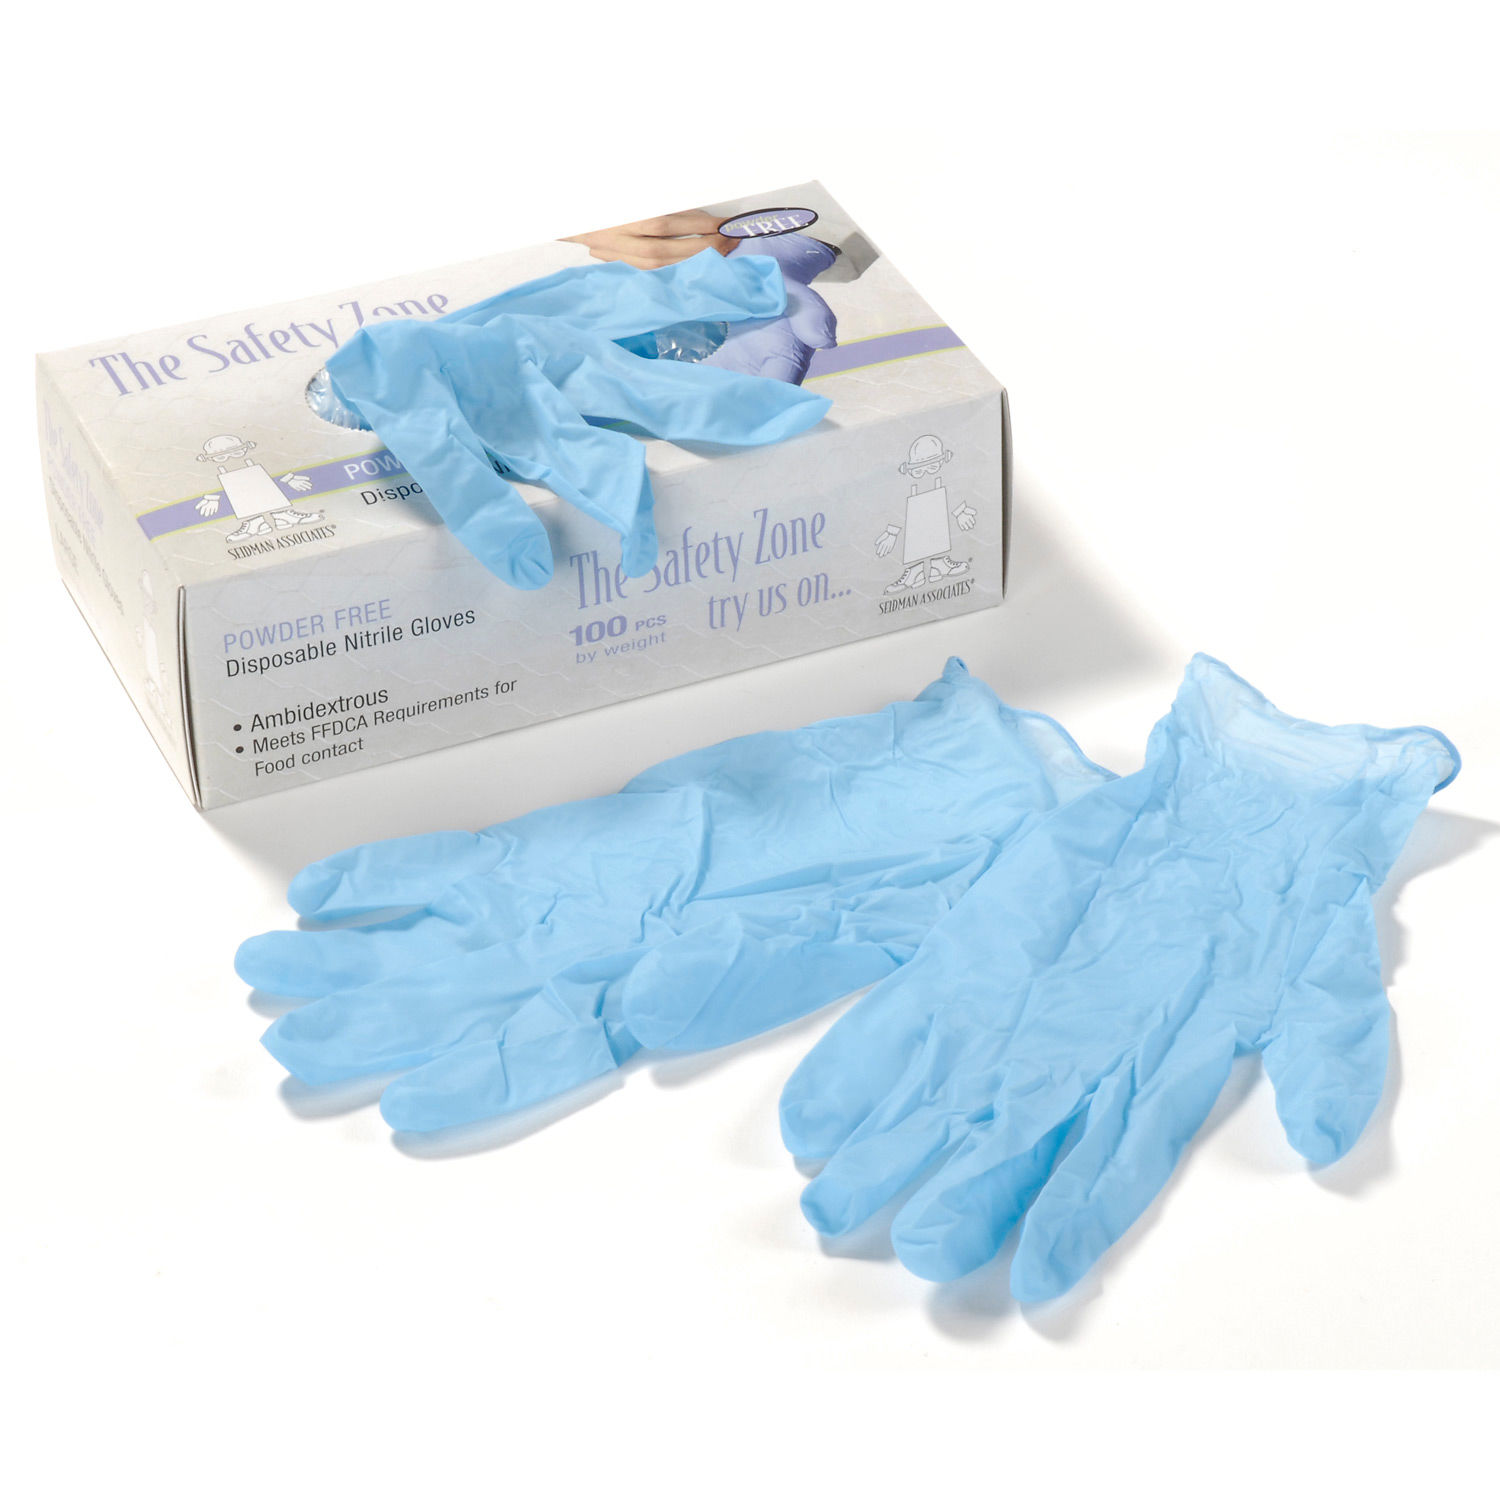 surgical gloves xl